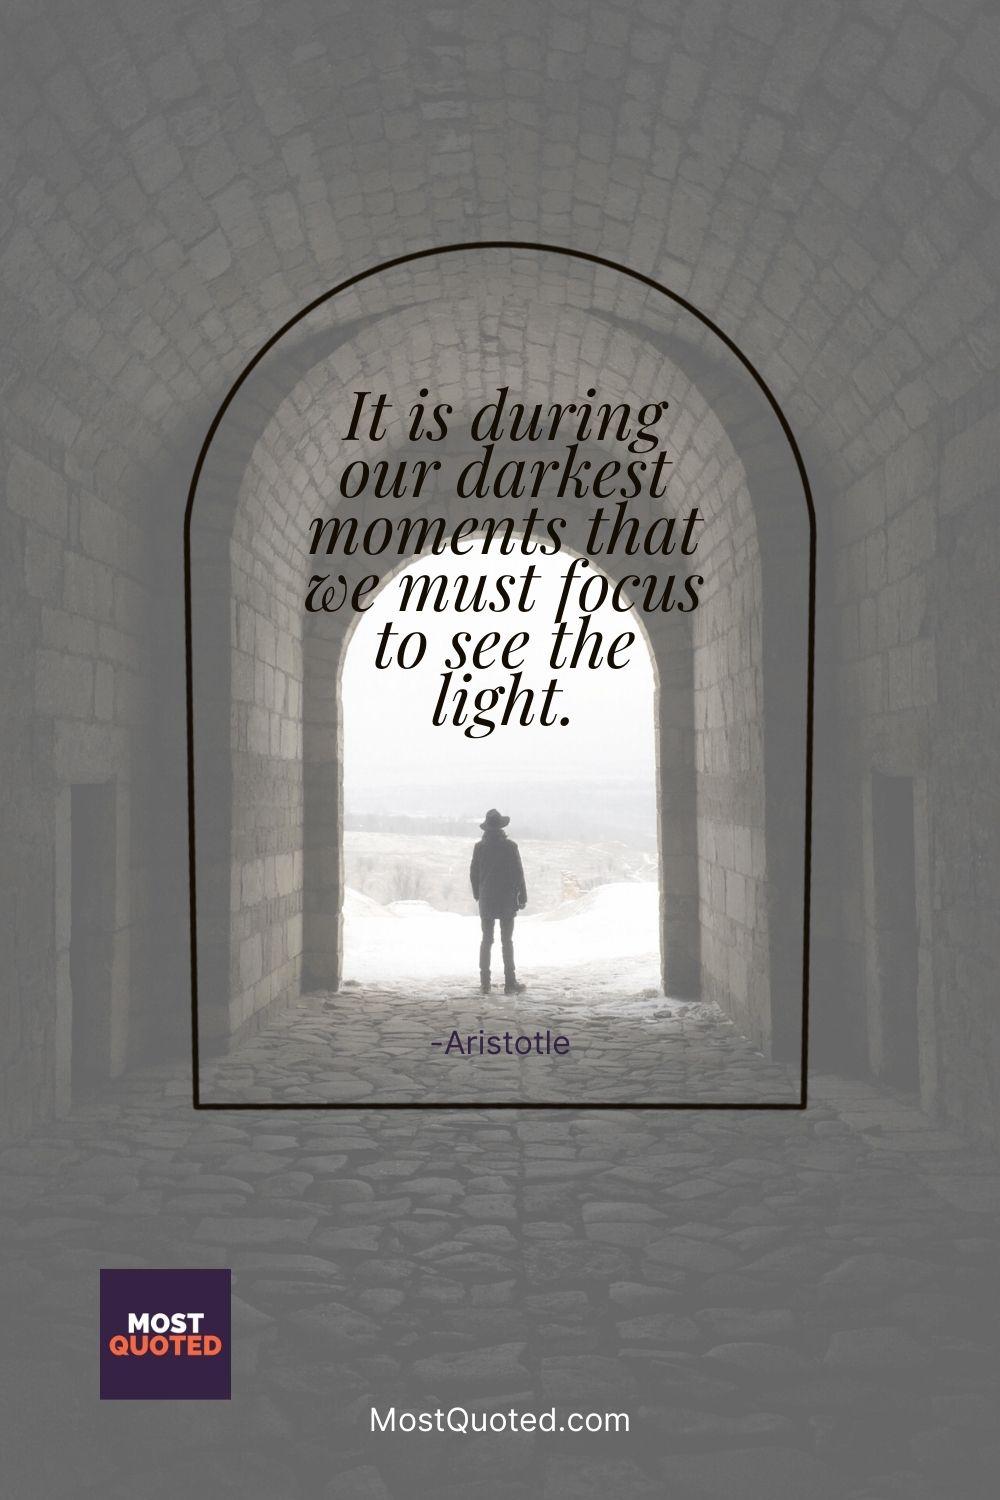 It is during our darkest moments that we must focus to see the light. - Aristotle